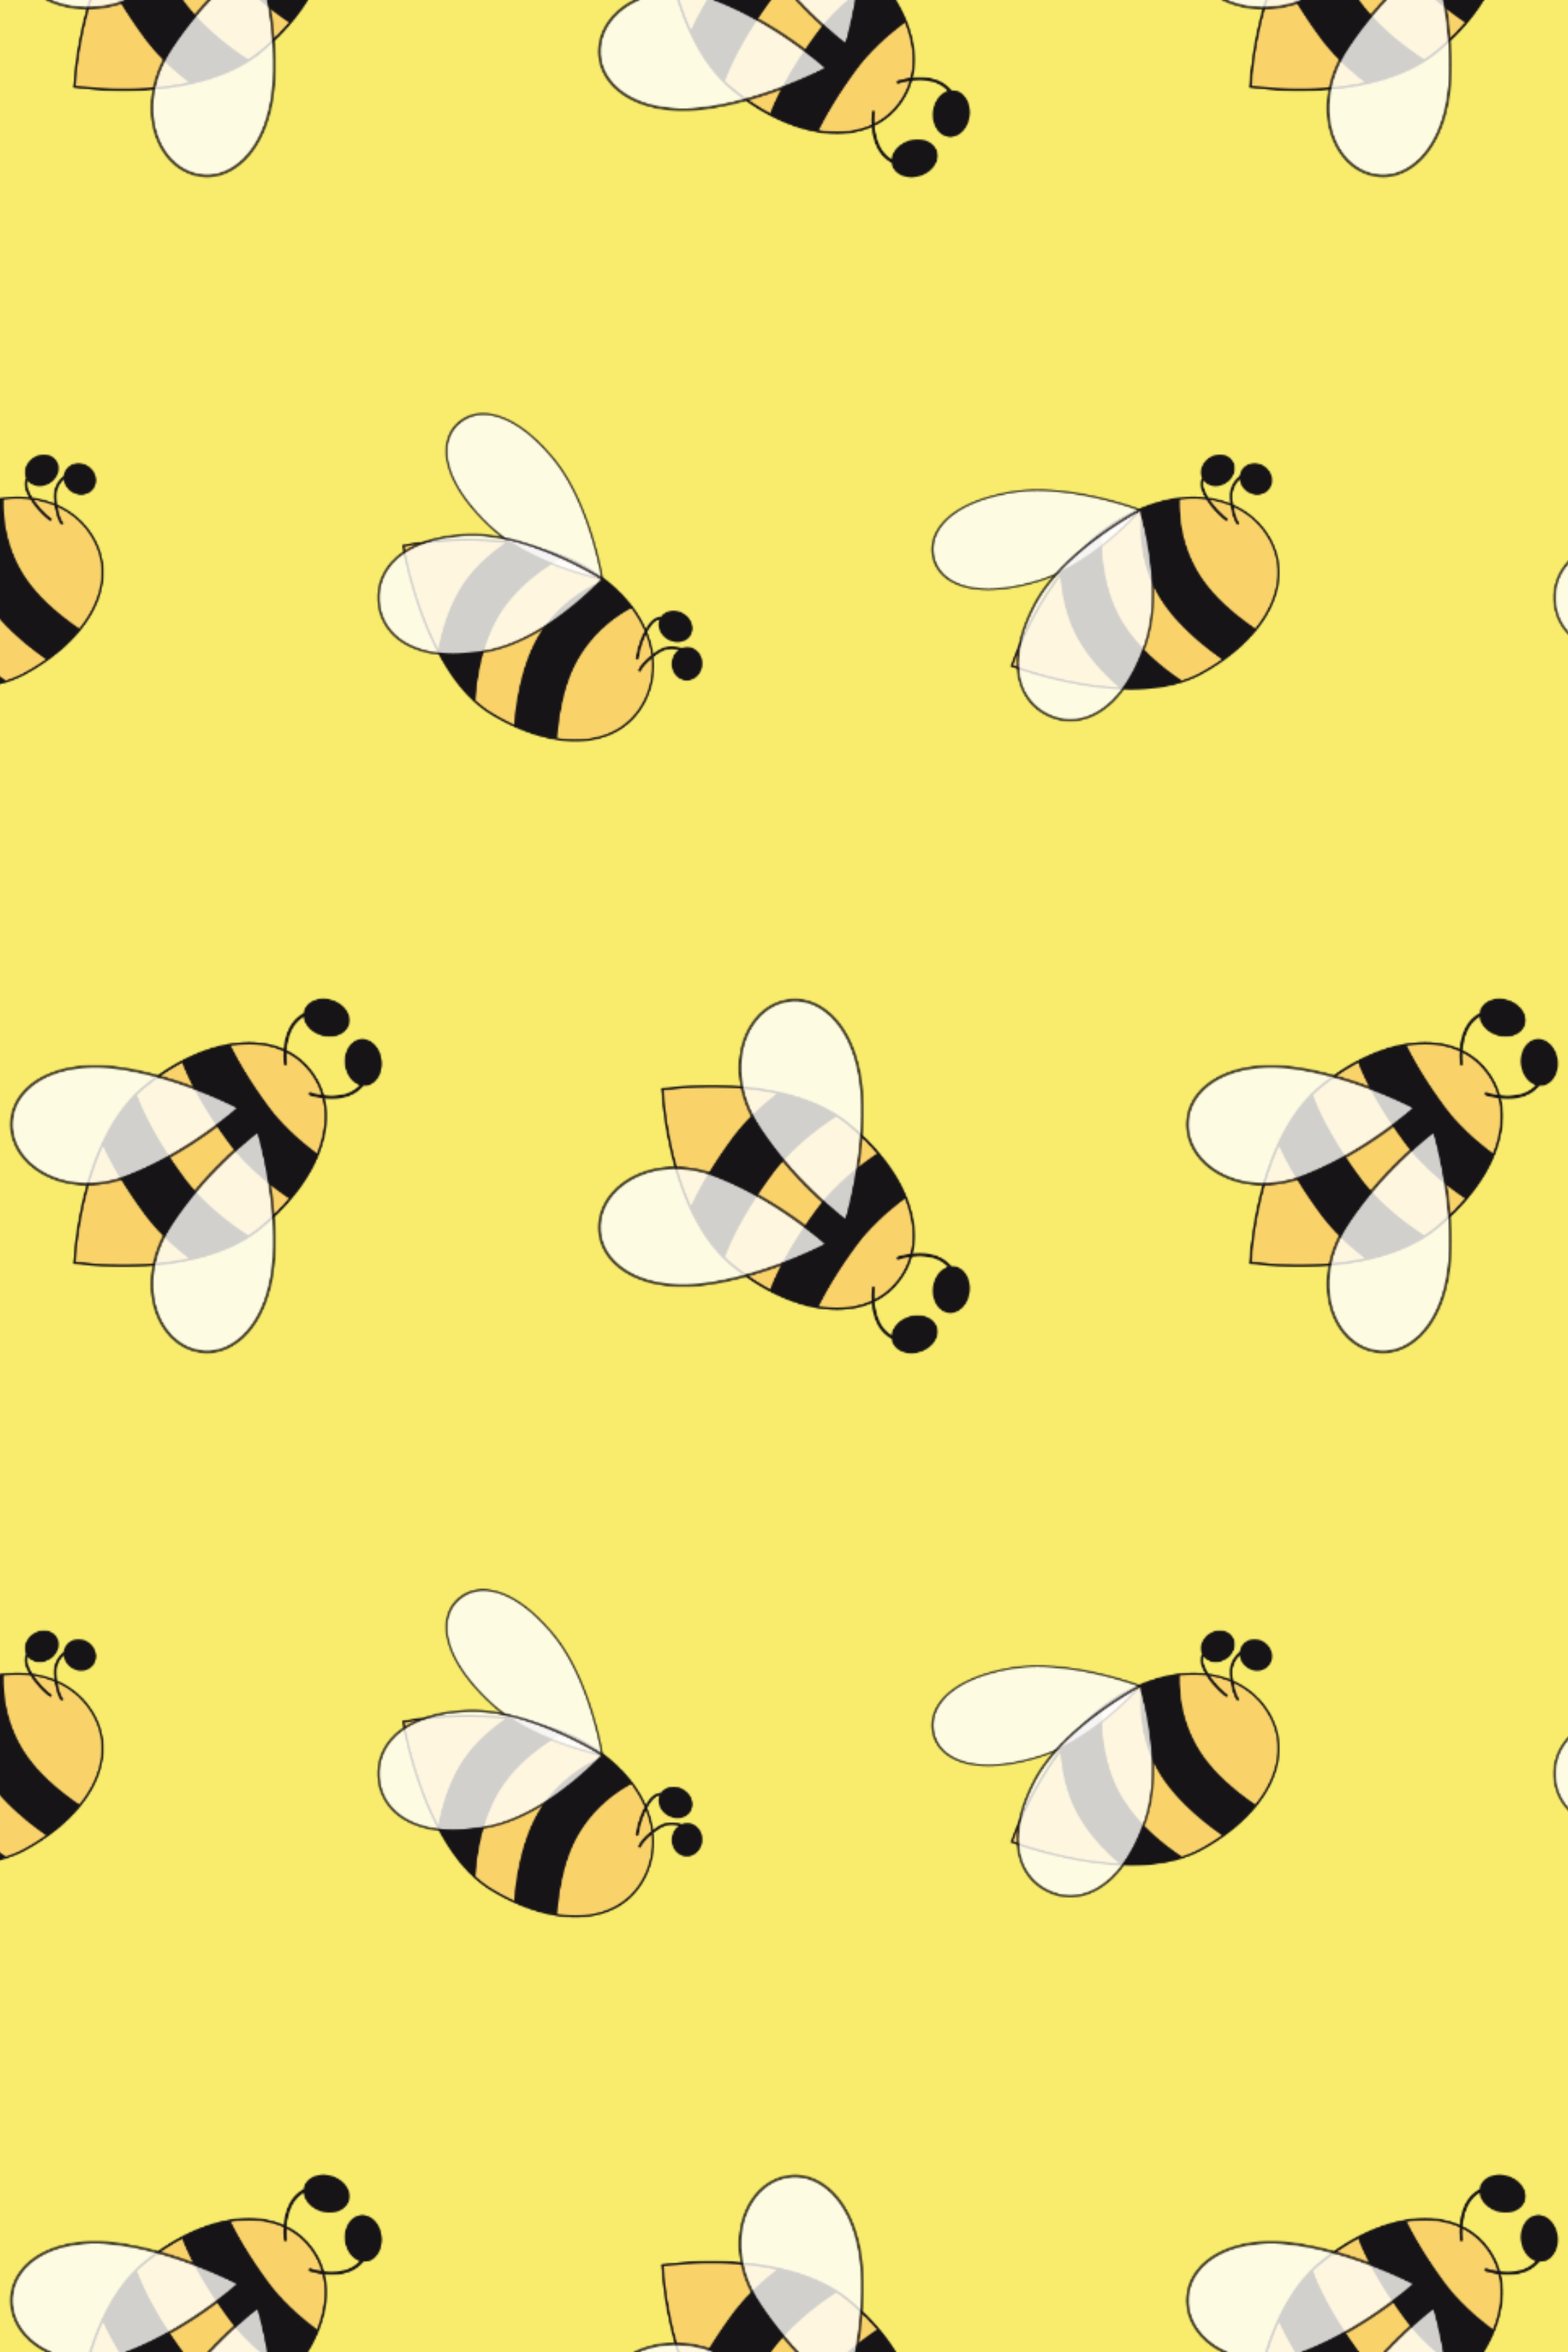 A pattern of bees on a yellow background - Bee